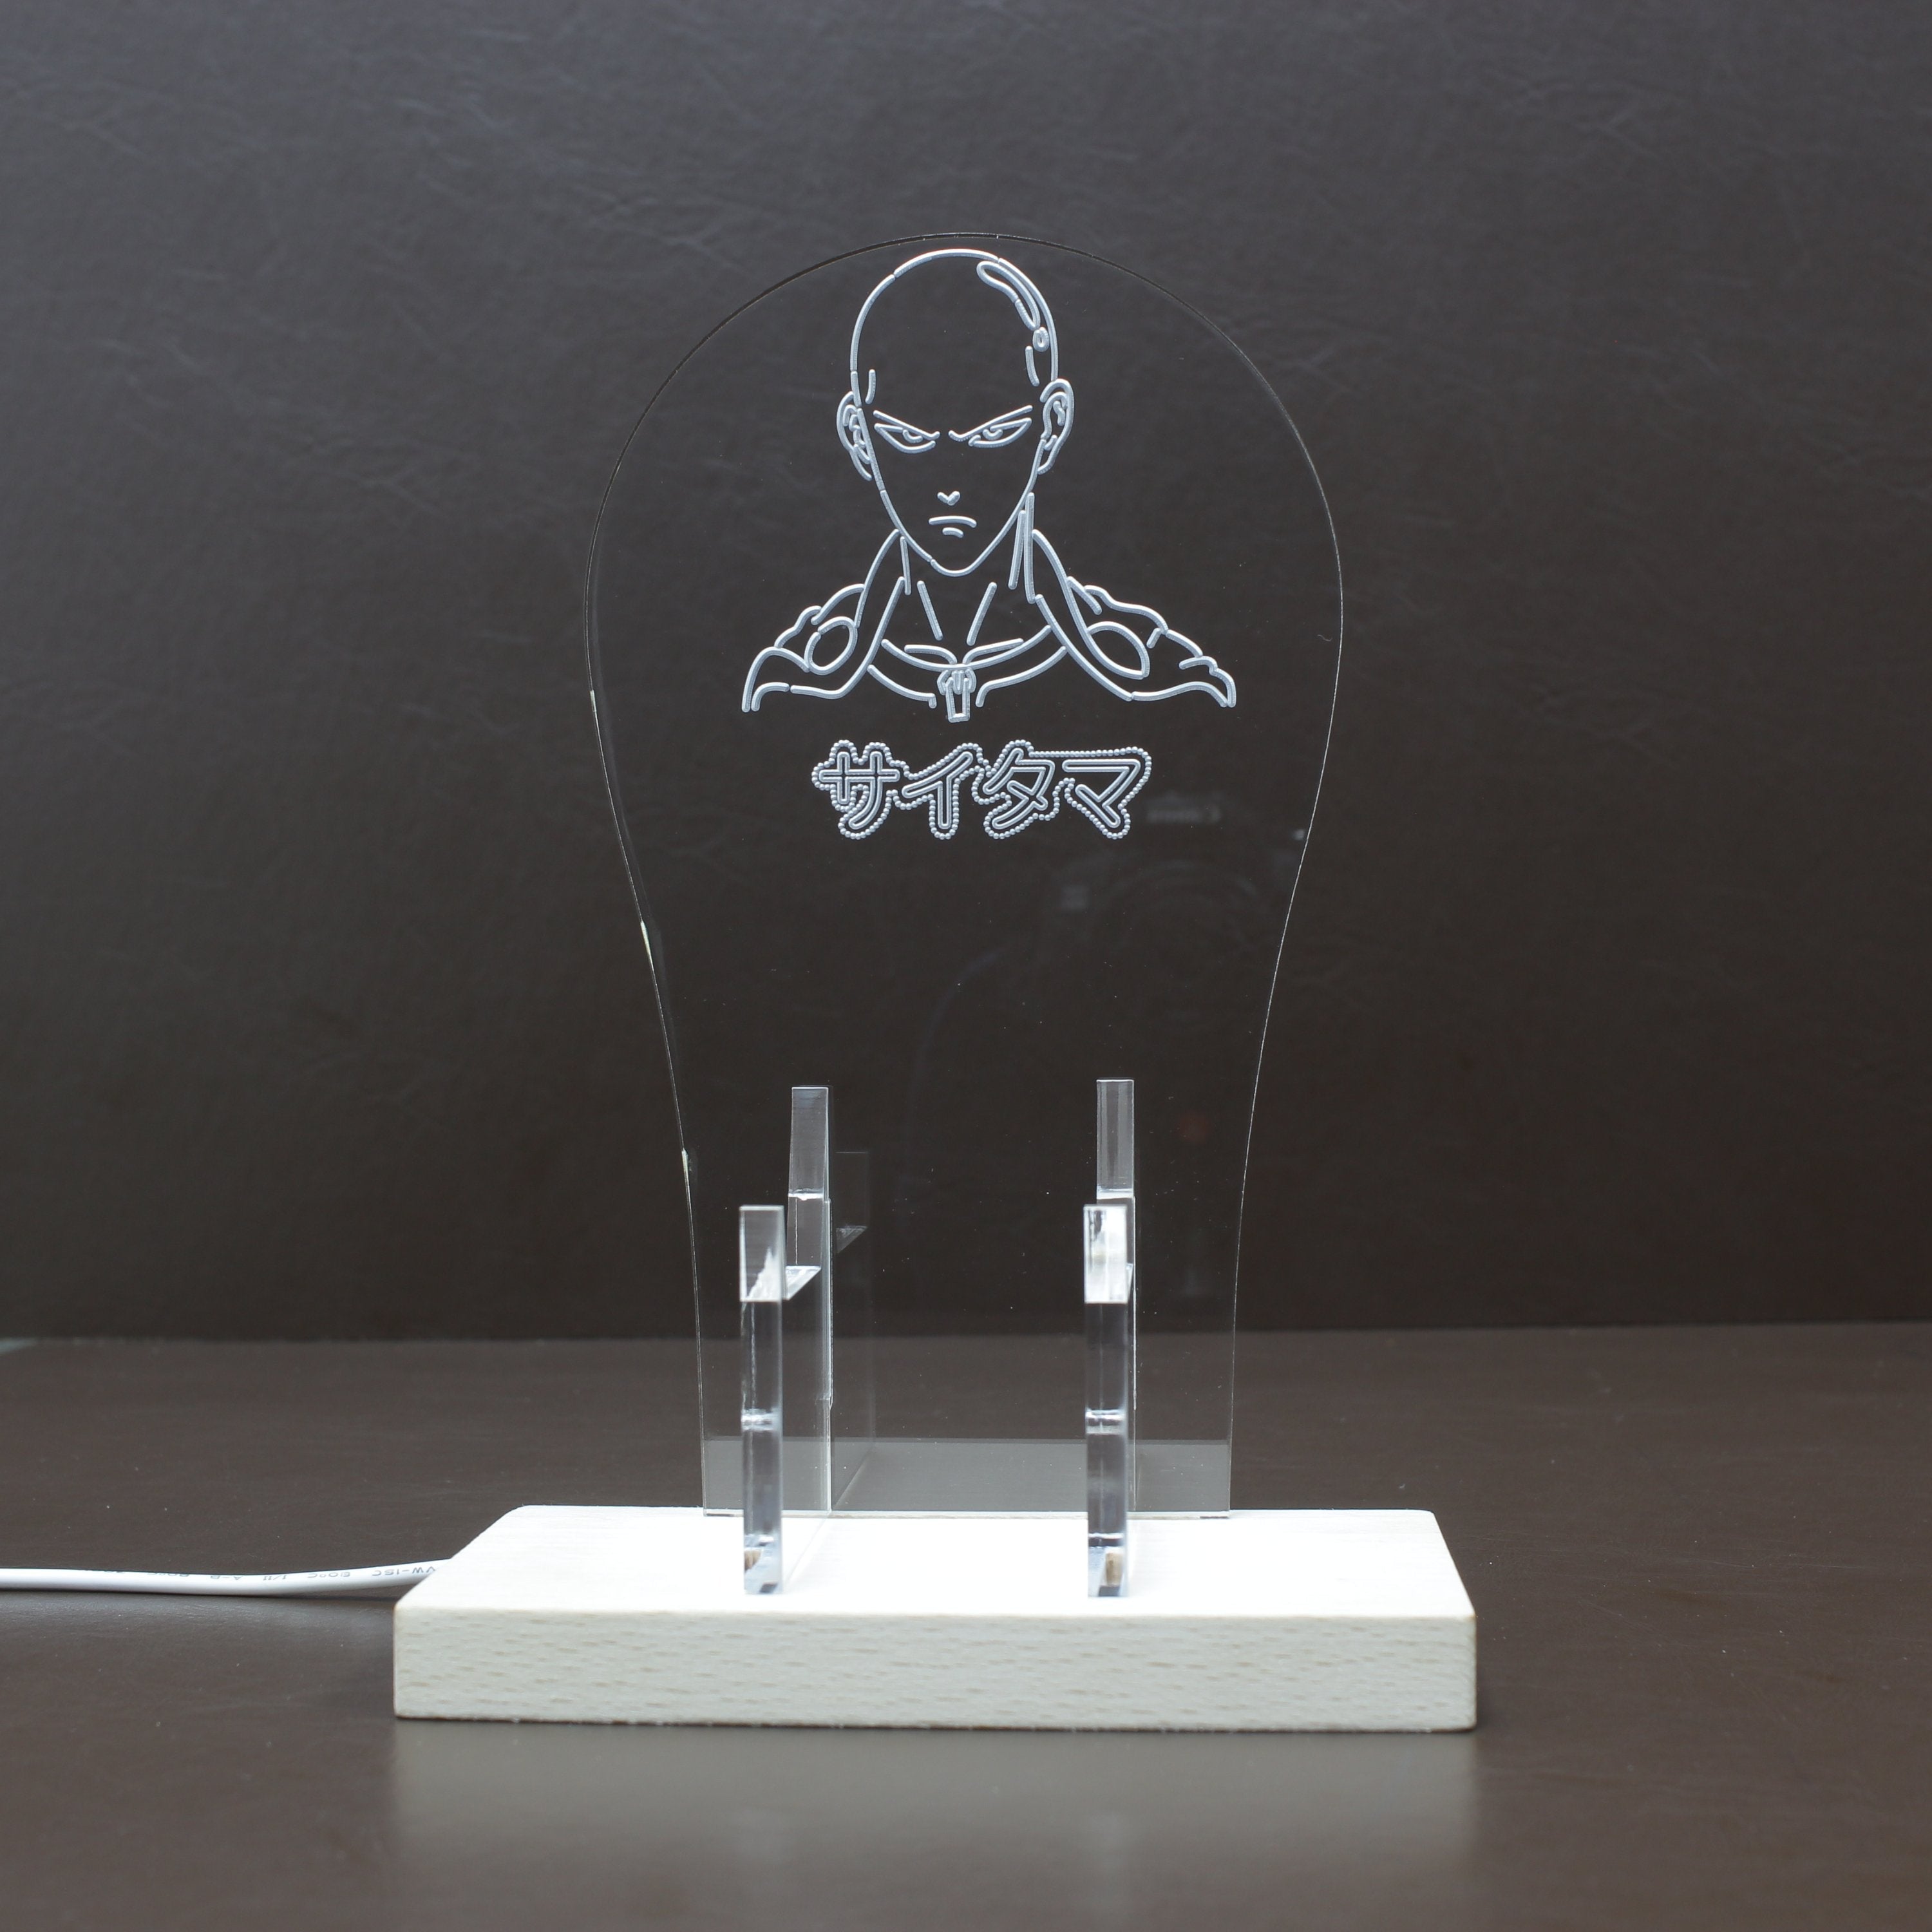 One Punch Man LED Gaming Headset Controller Stand